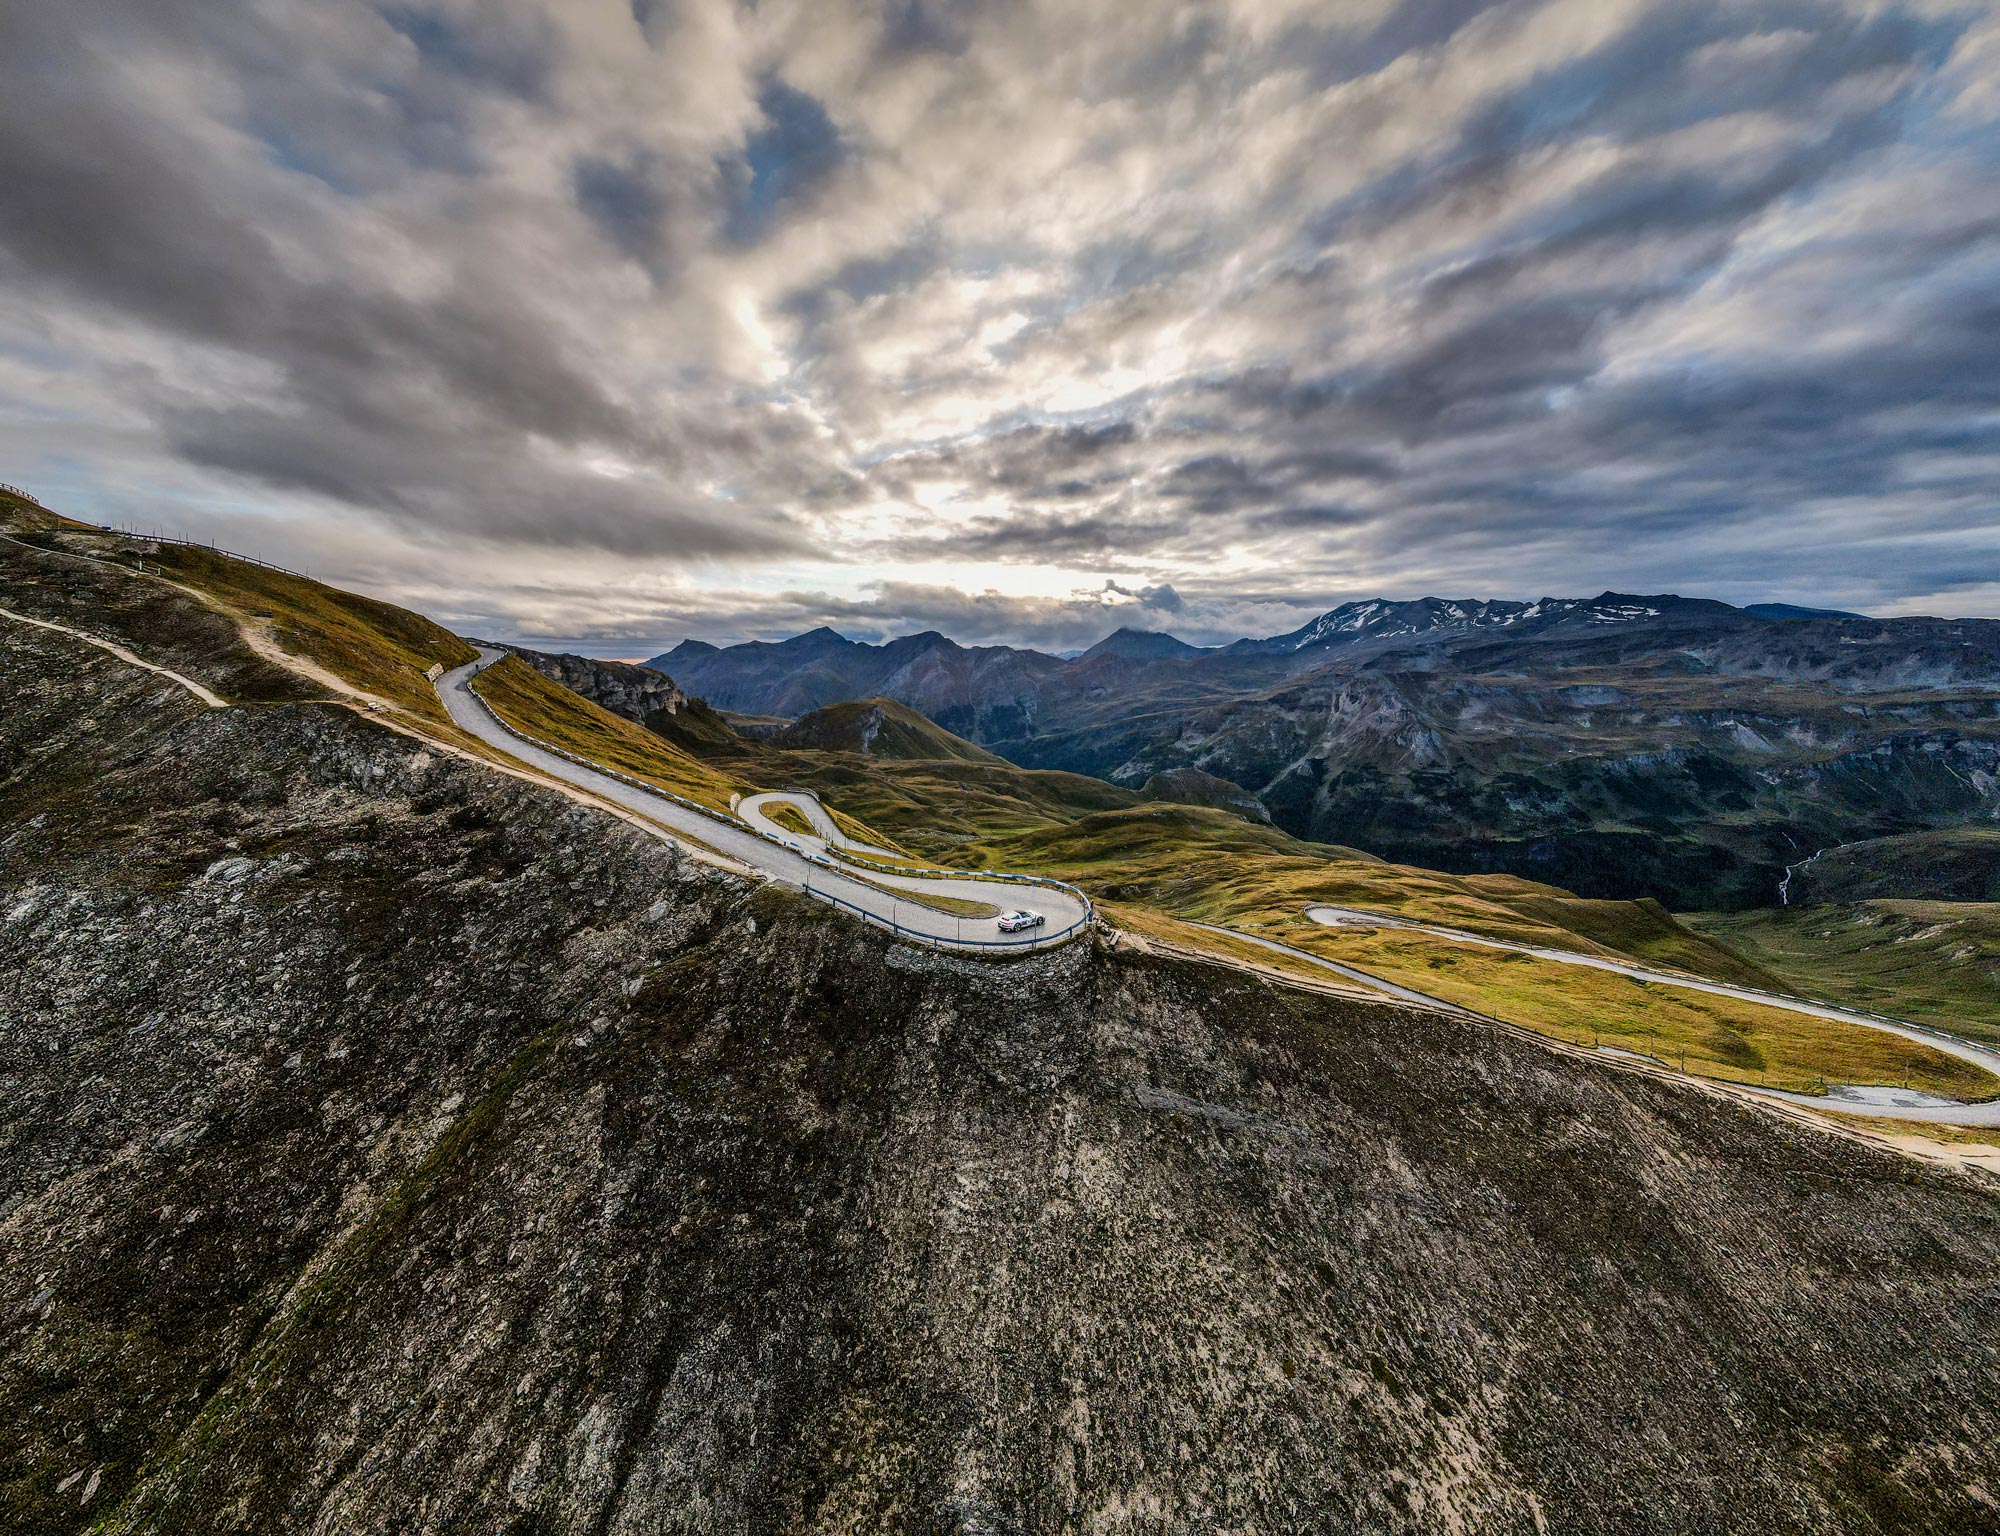 Panoramic view of mountain roads and Alps under grey skies